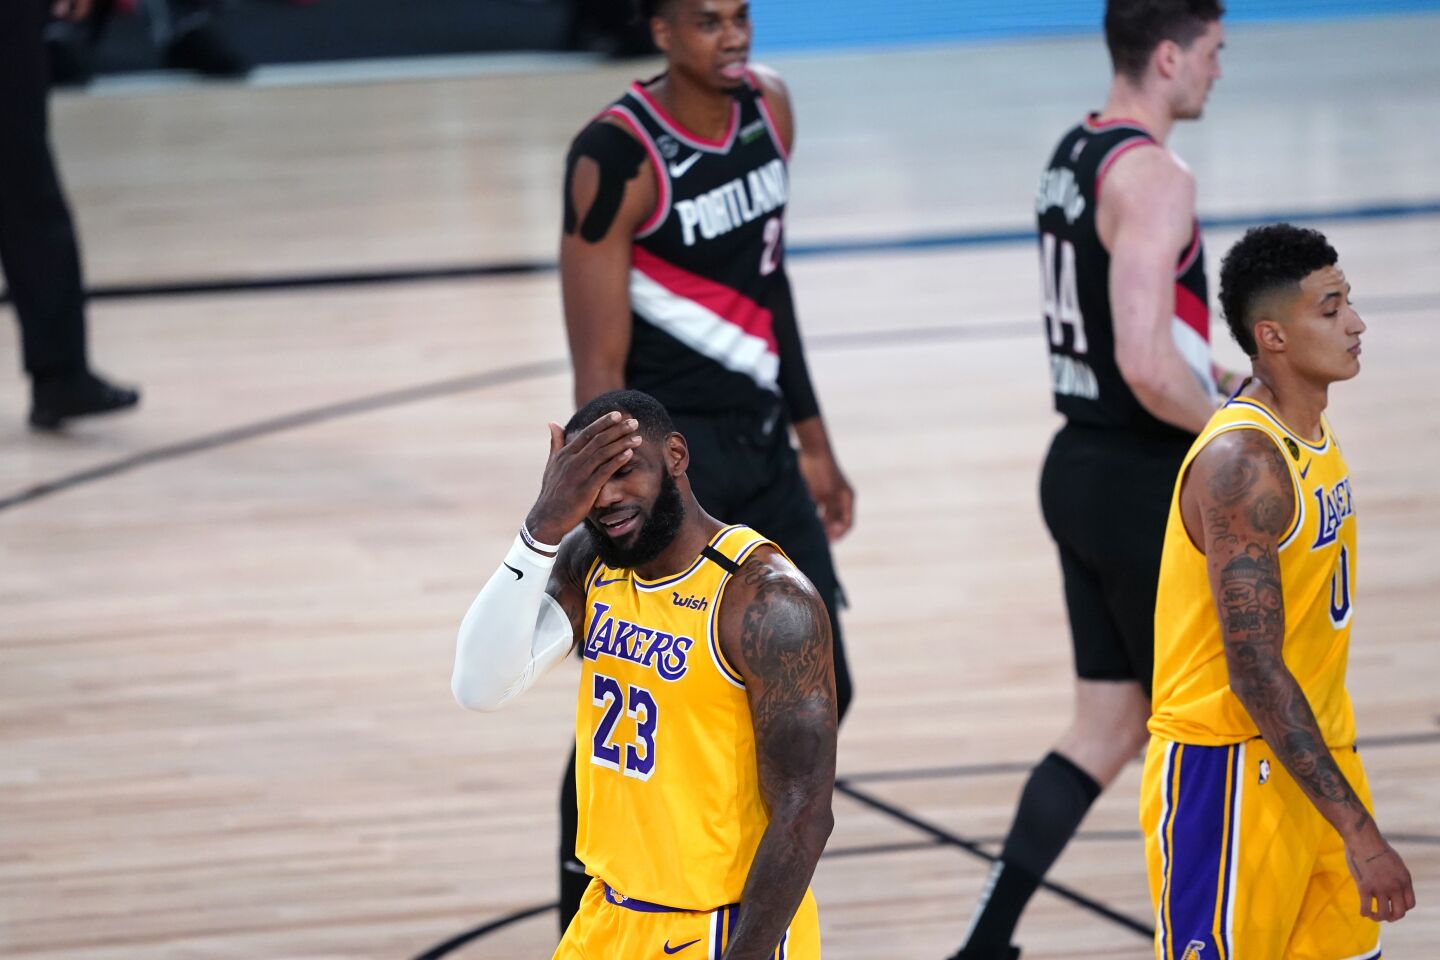 Lakers forward LeBron James reacts to a foul by Portland Trail Blazers guard Damian Lillard during the first half.